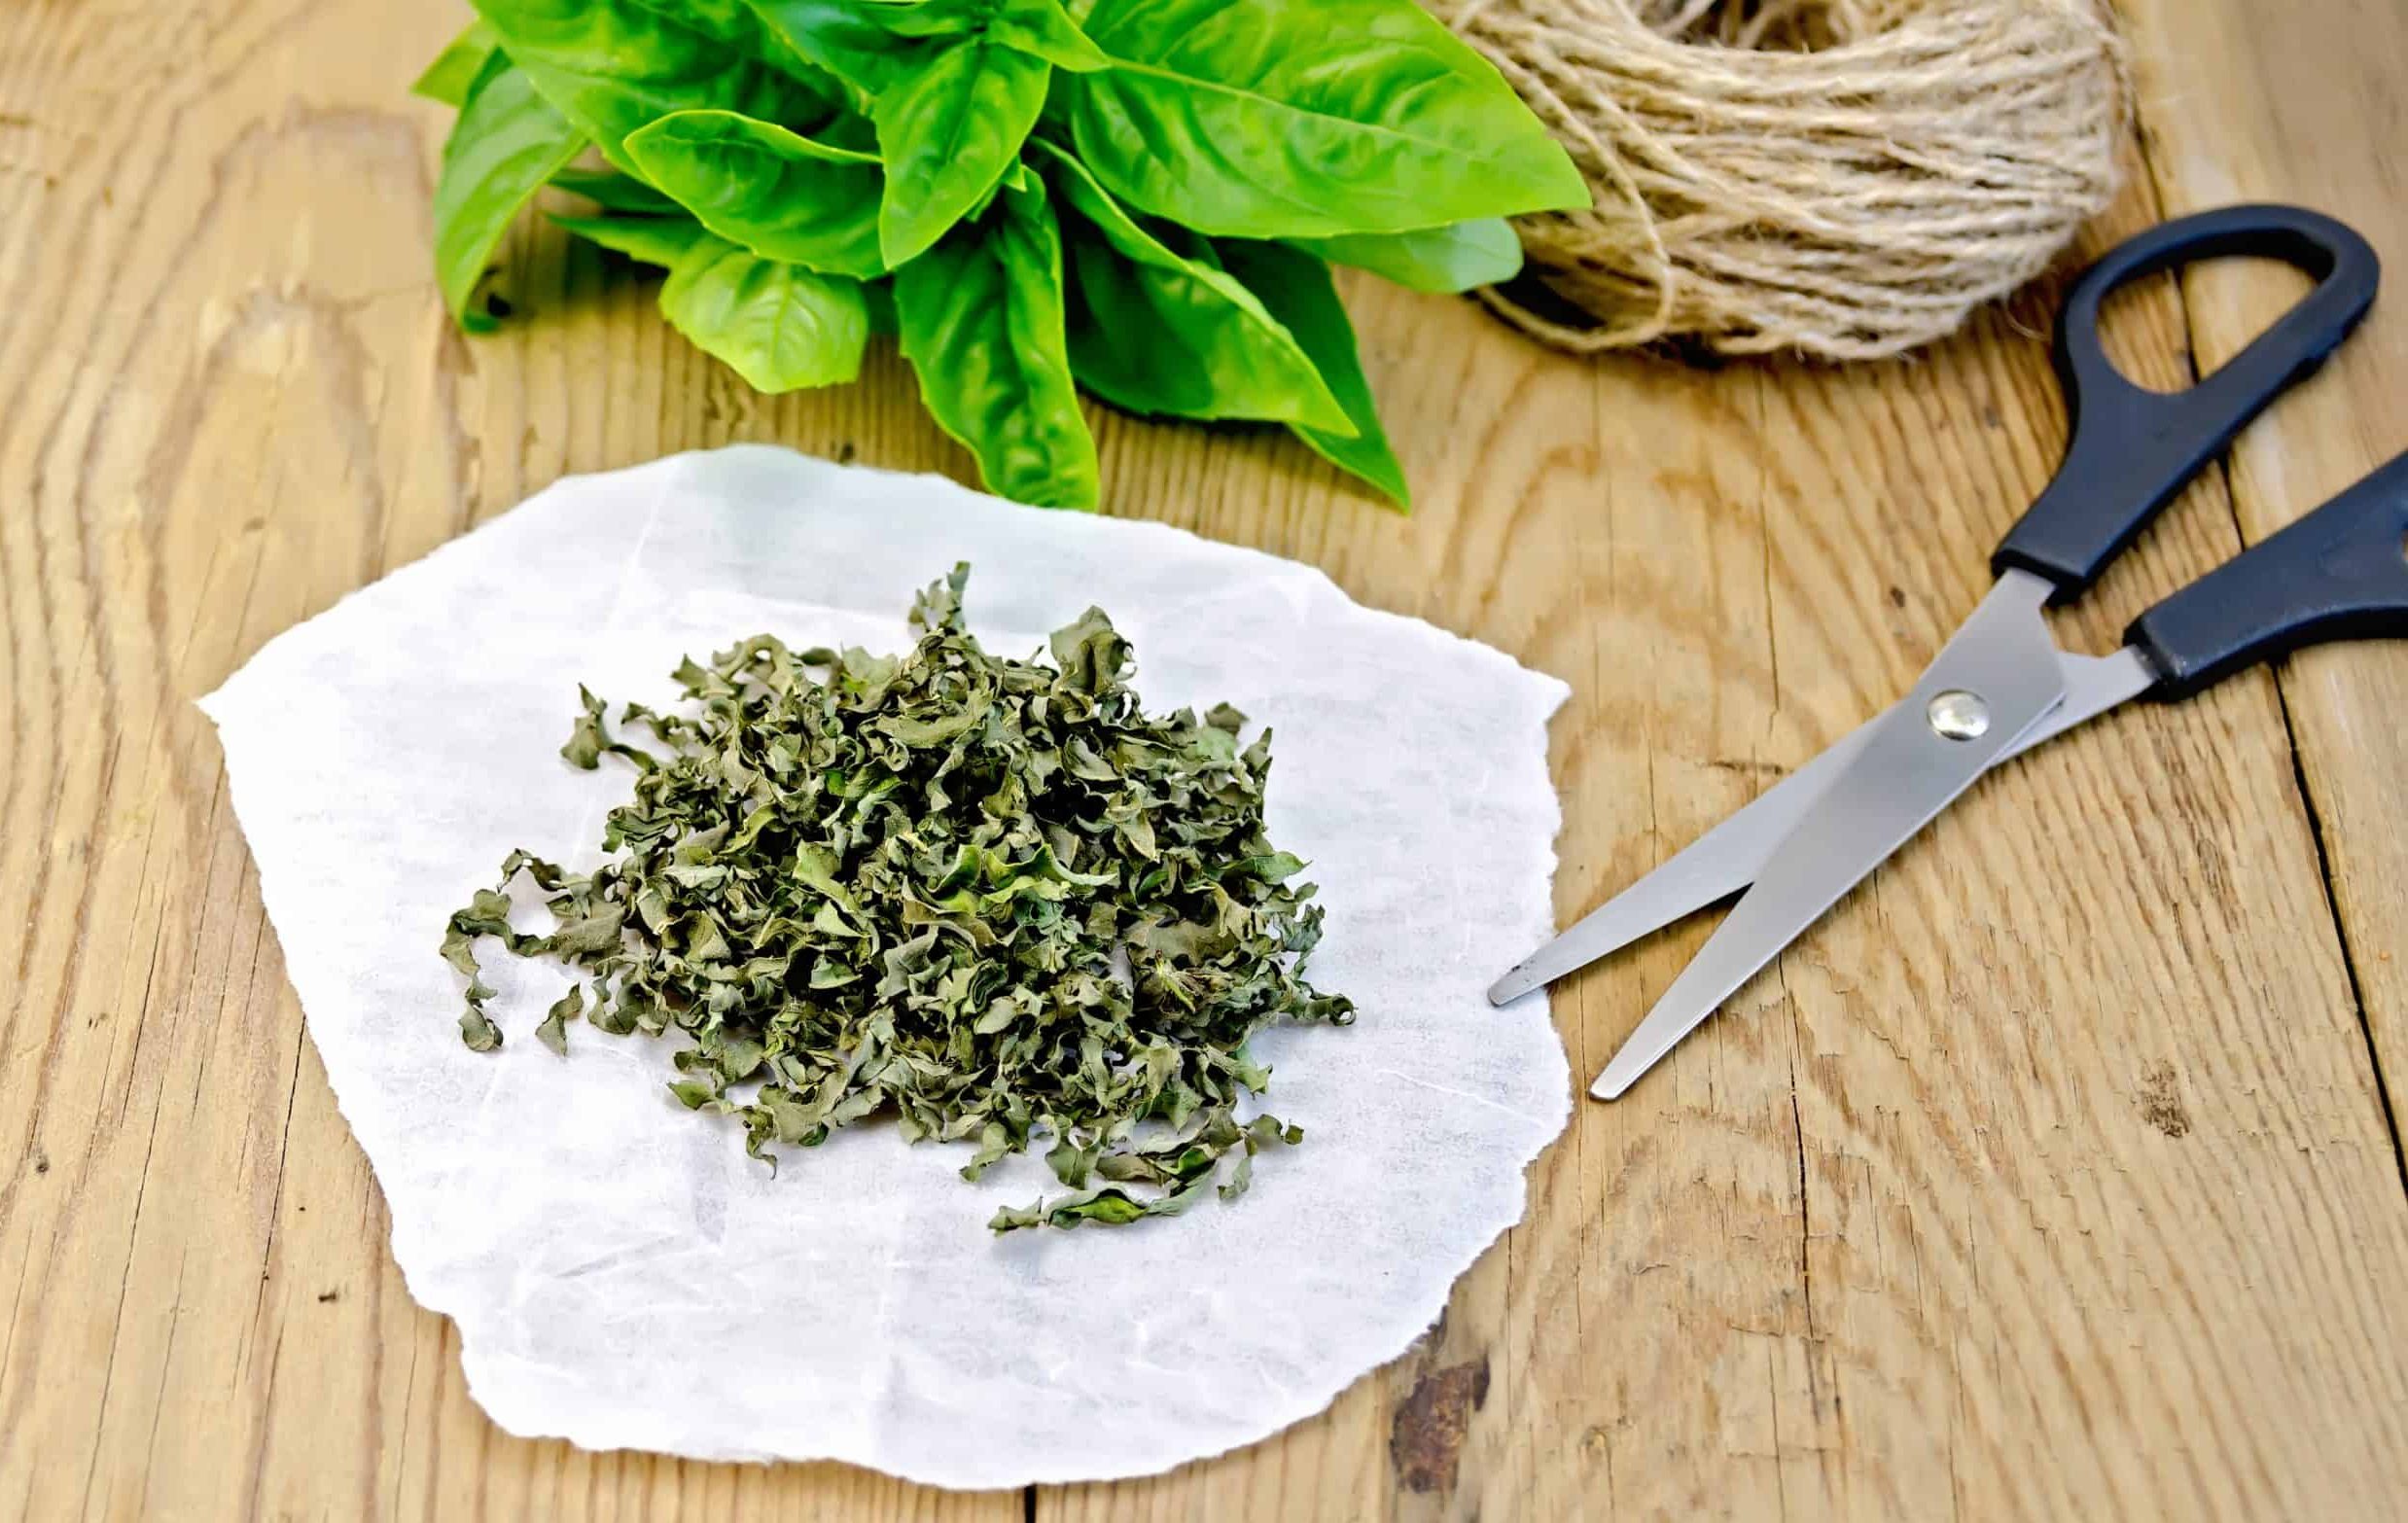 How to dry basil